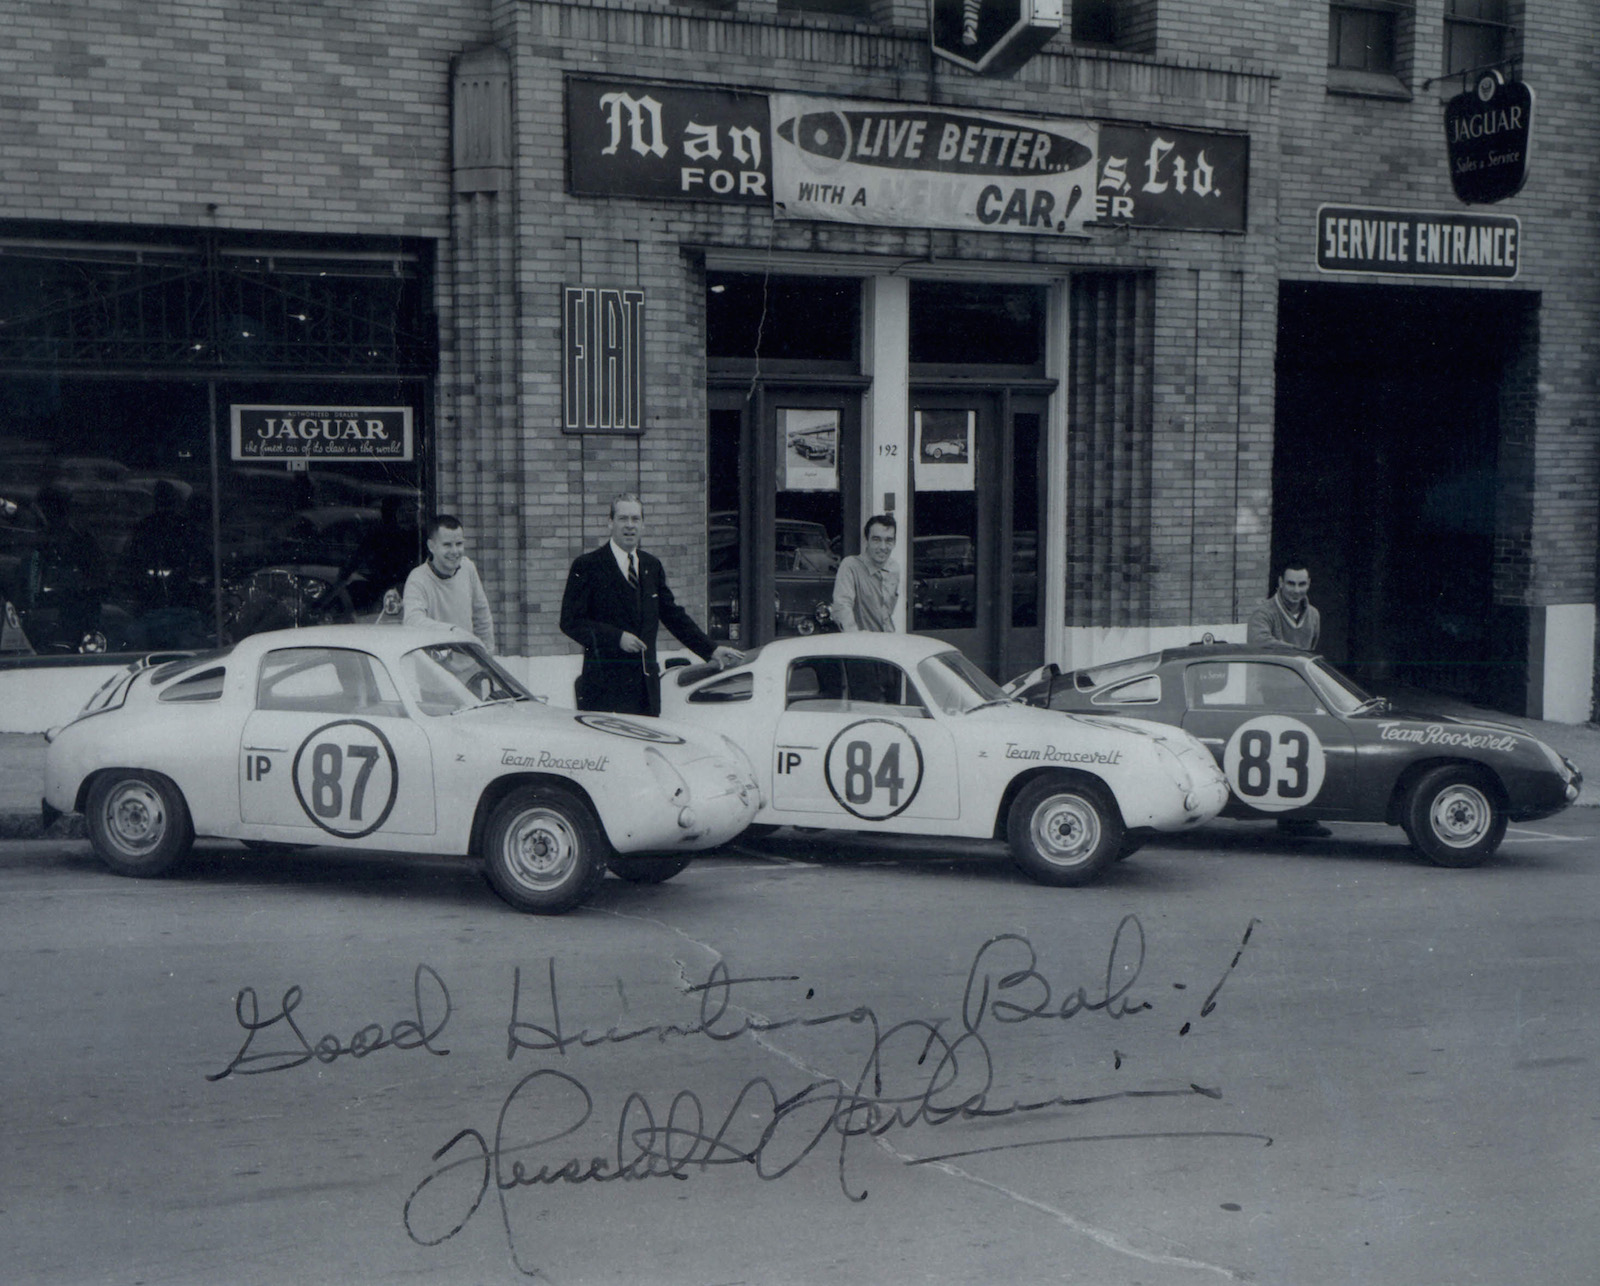 More About The Fiat Abarth Team Roosevelt